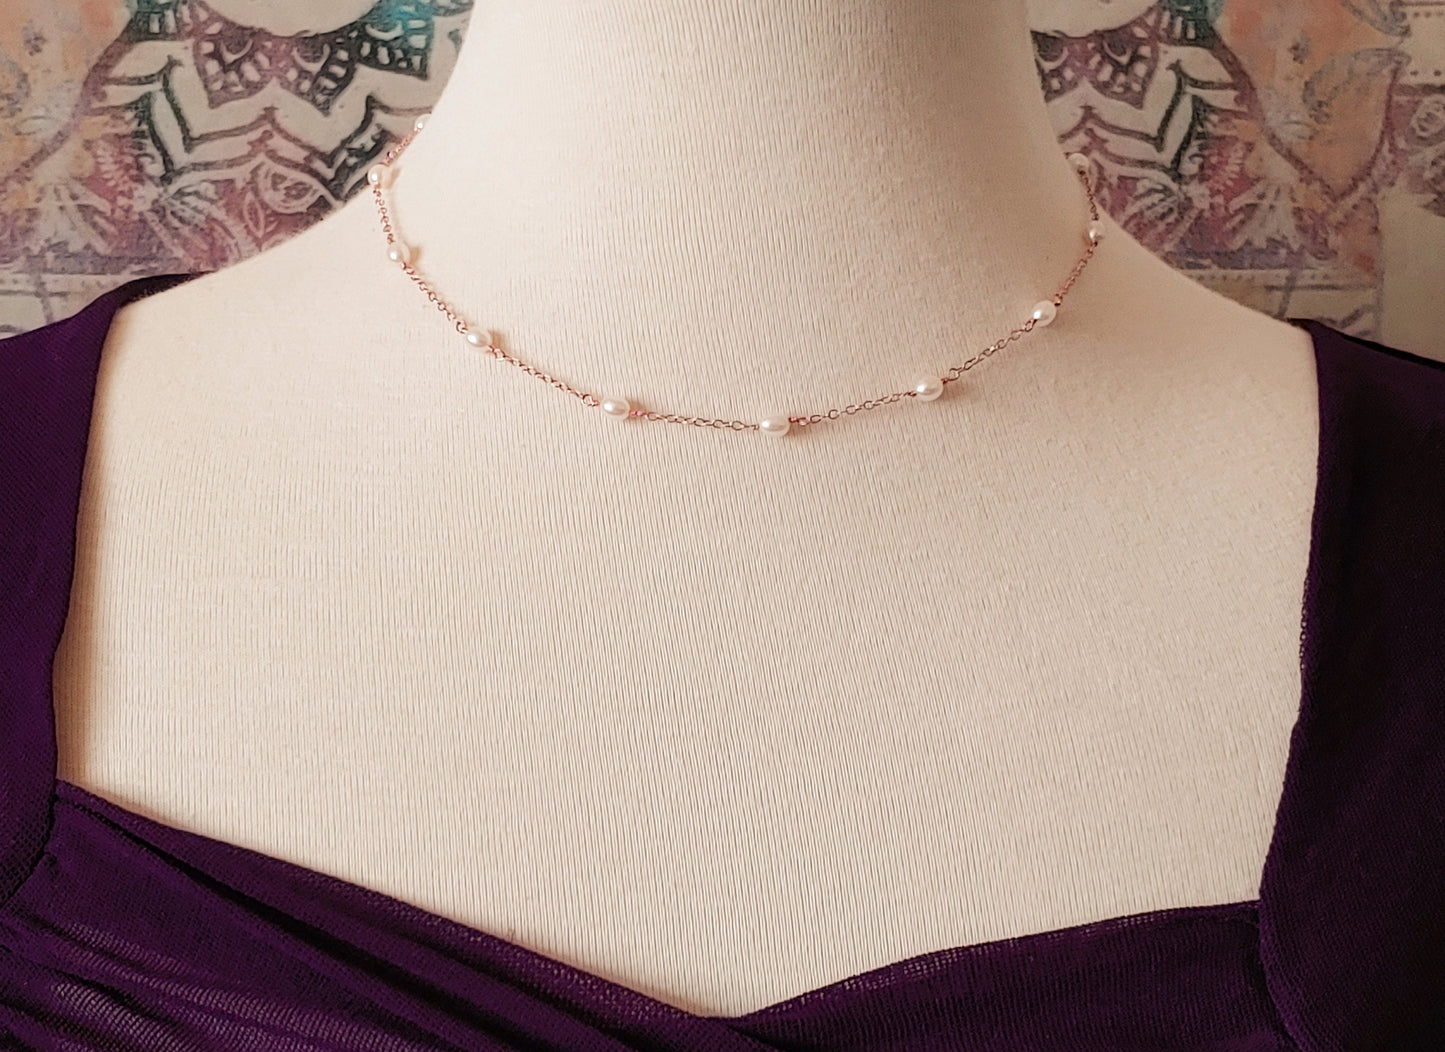 Rose gold tin cup necklace with infinity hoop earrings